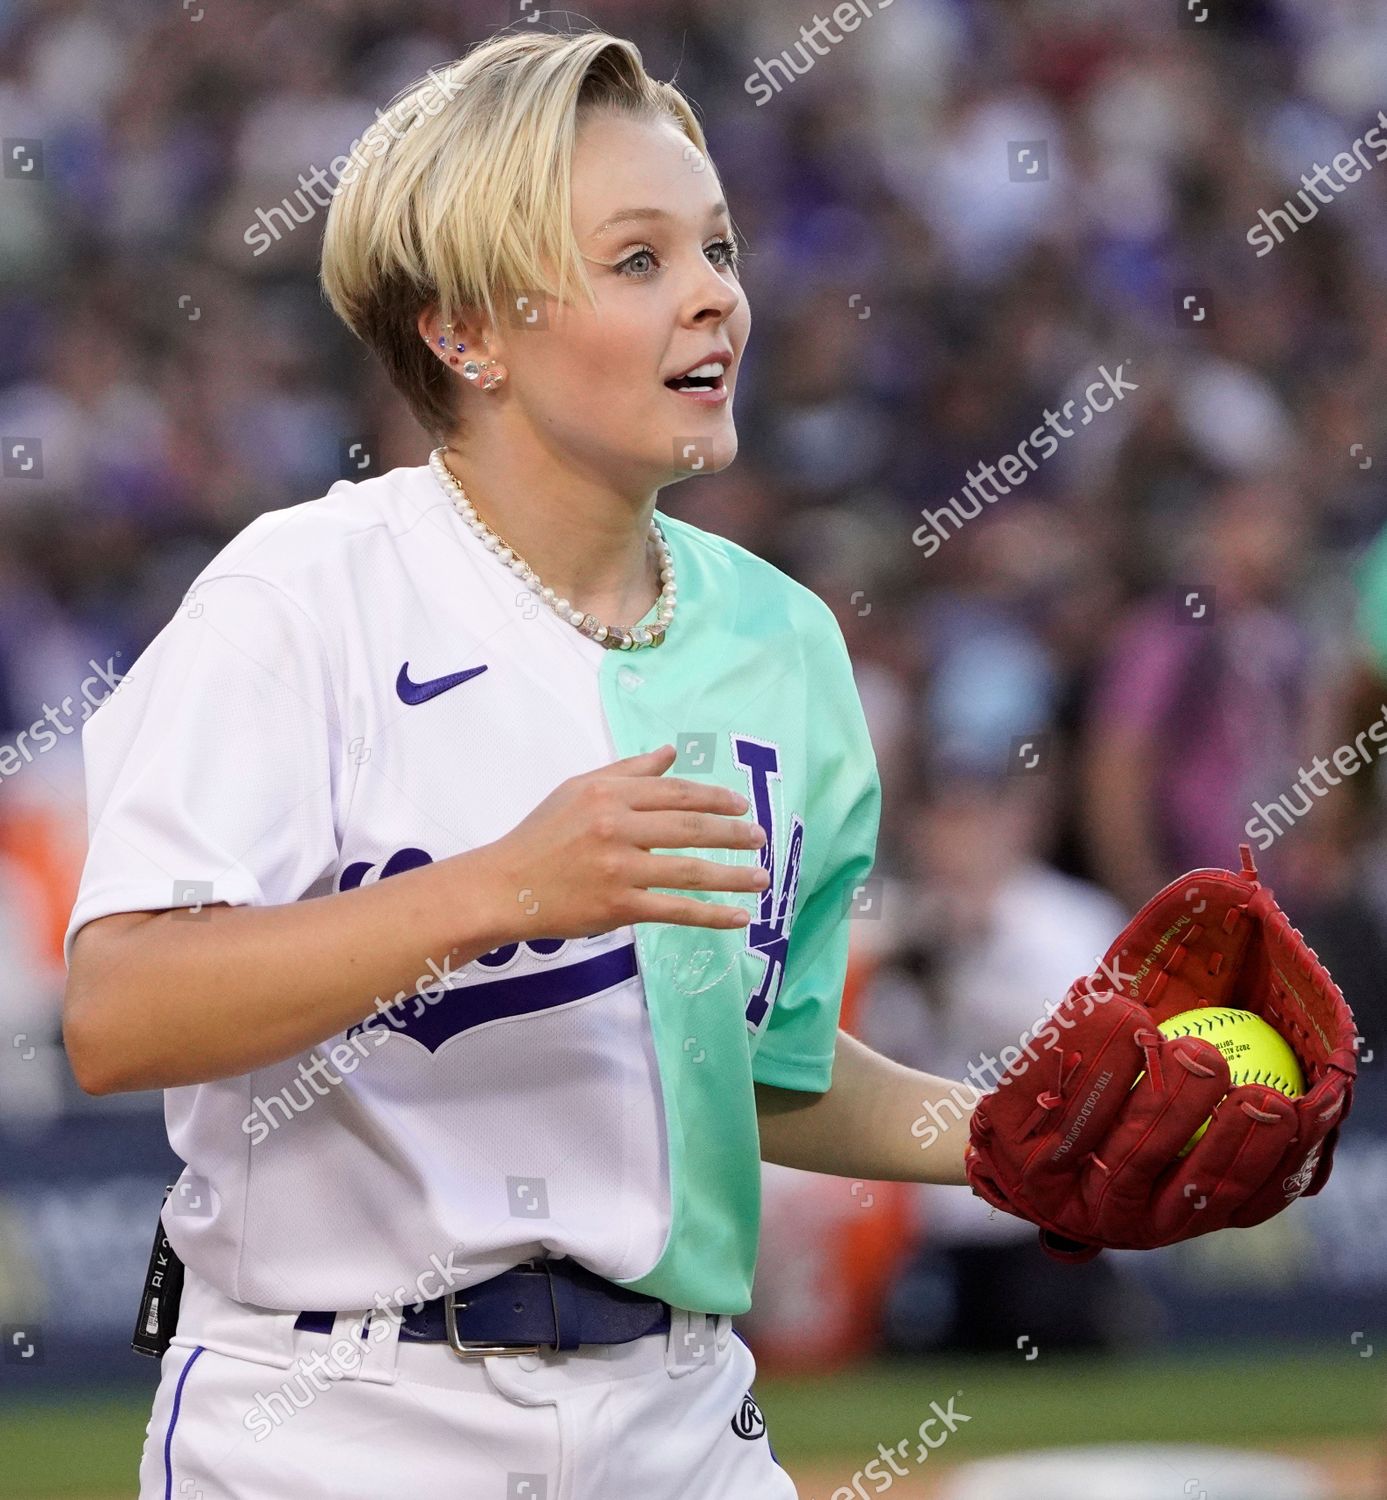 JoJo Siwa - Plays in the MGM All-Star Celebrity Softball Game at